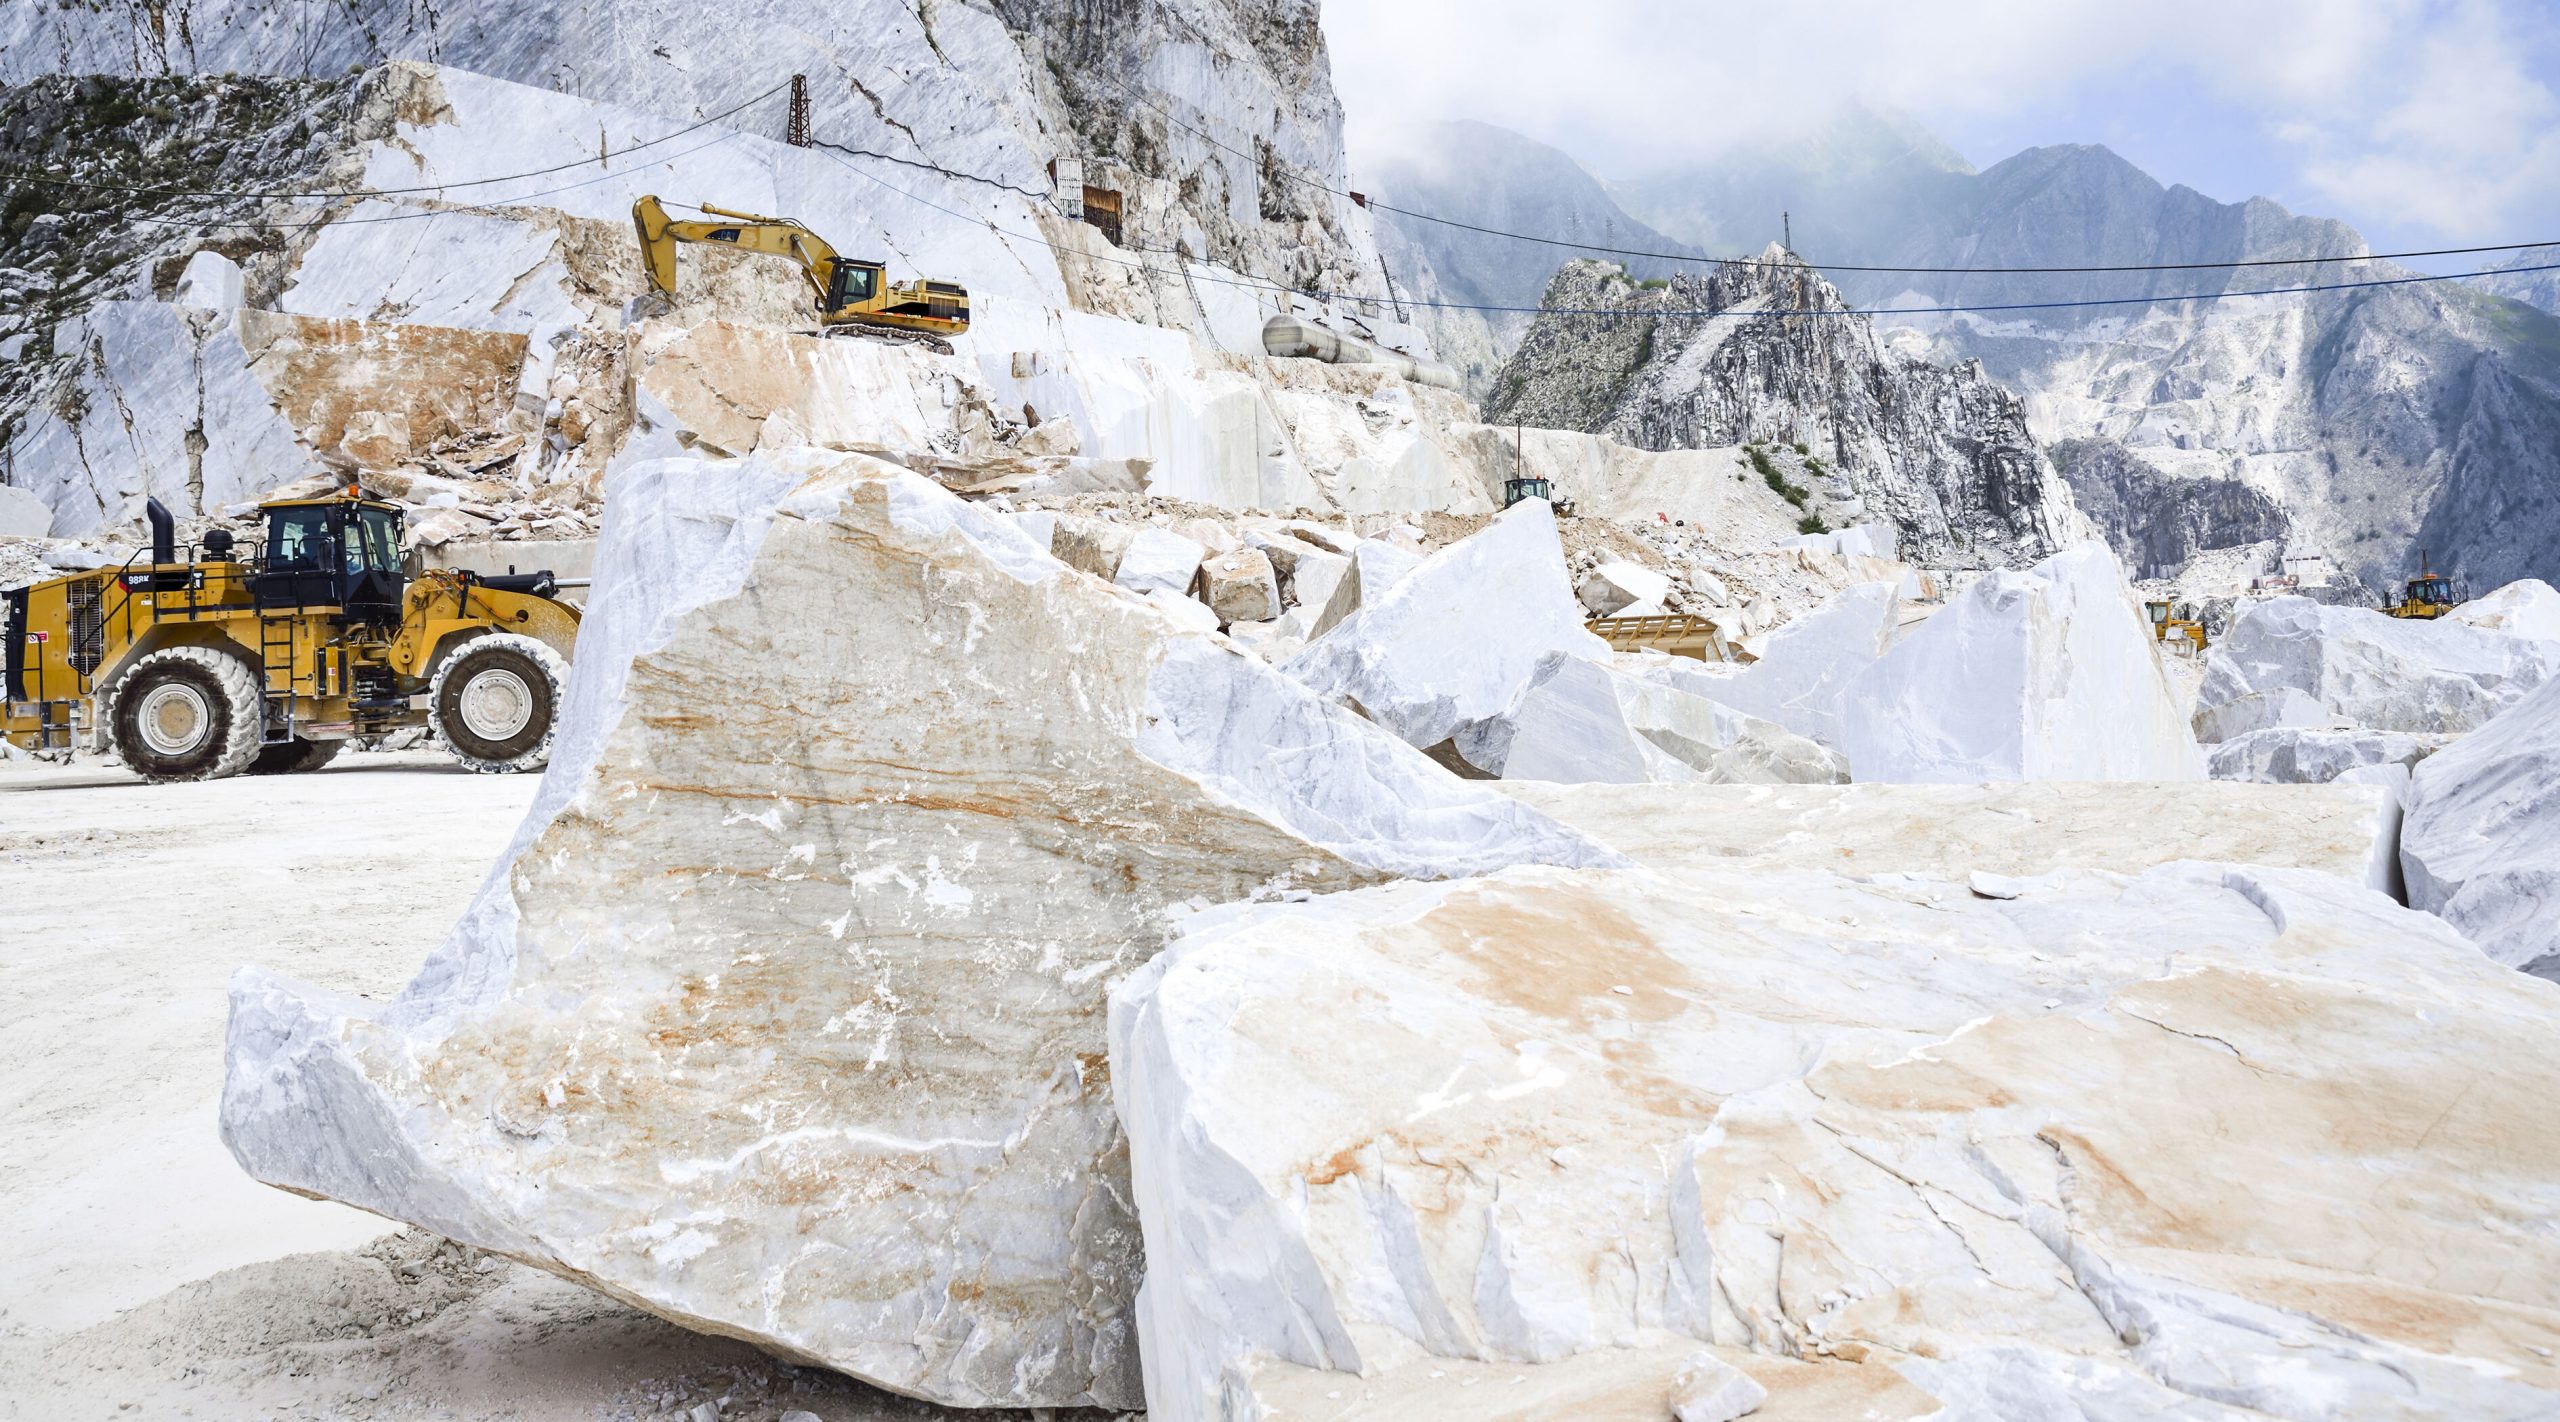 A quarry where they mine for Terrazzo rocks - a large truck and a white rock are pictured in a mountain area 